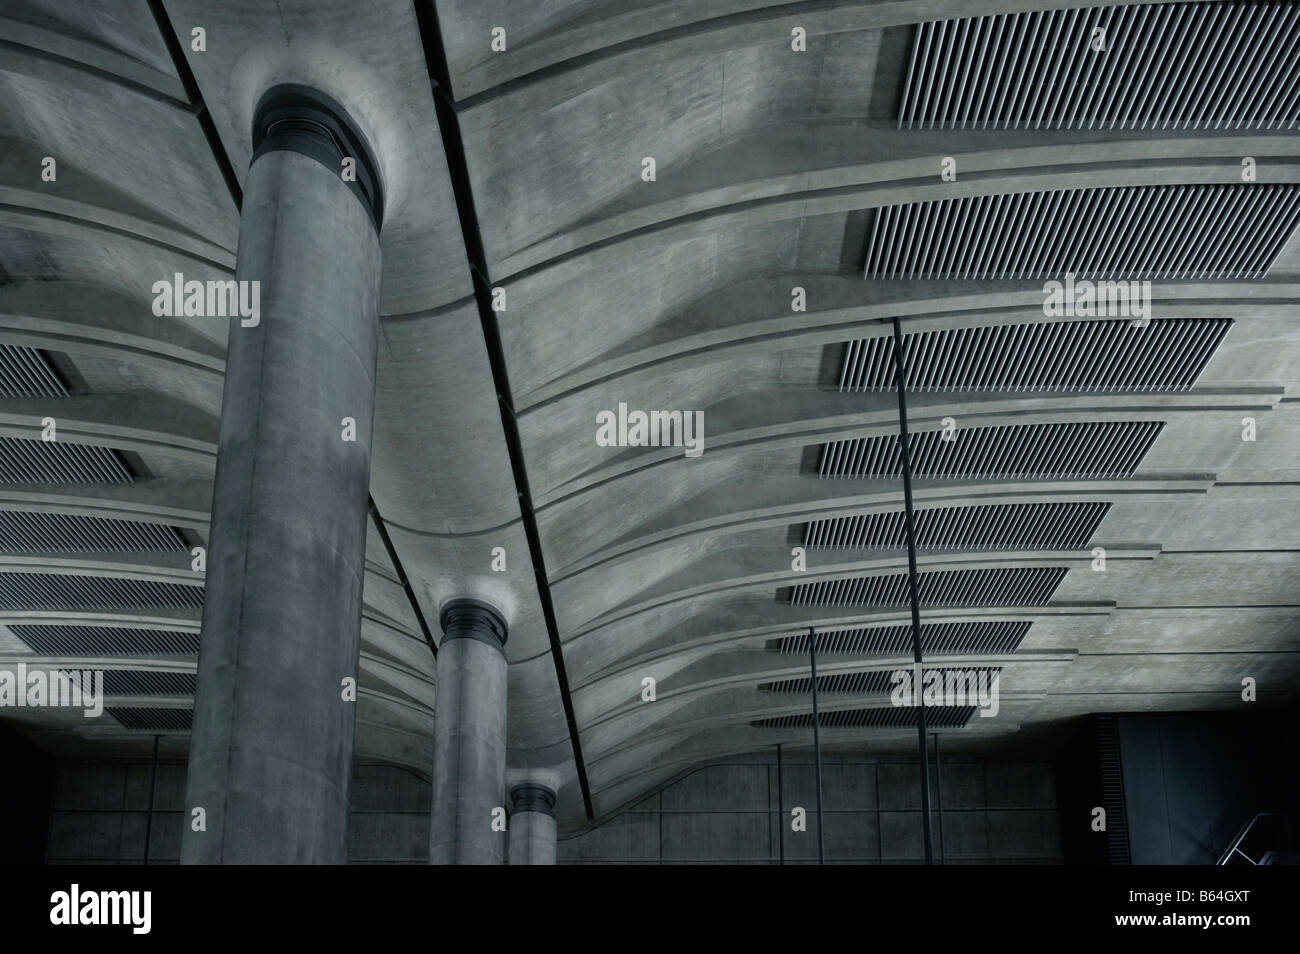 Concrete columns and roof structure at Canary Wharf Underground station Stock Photo